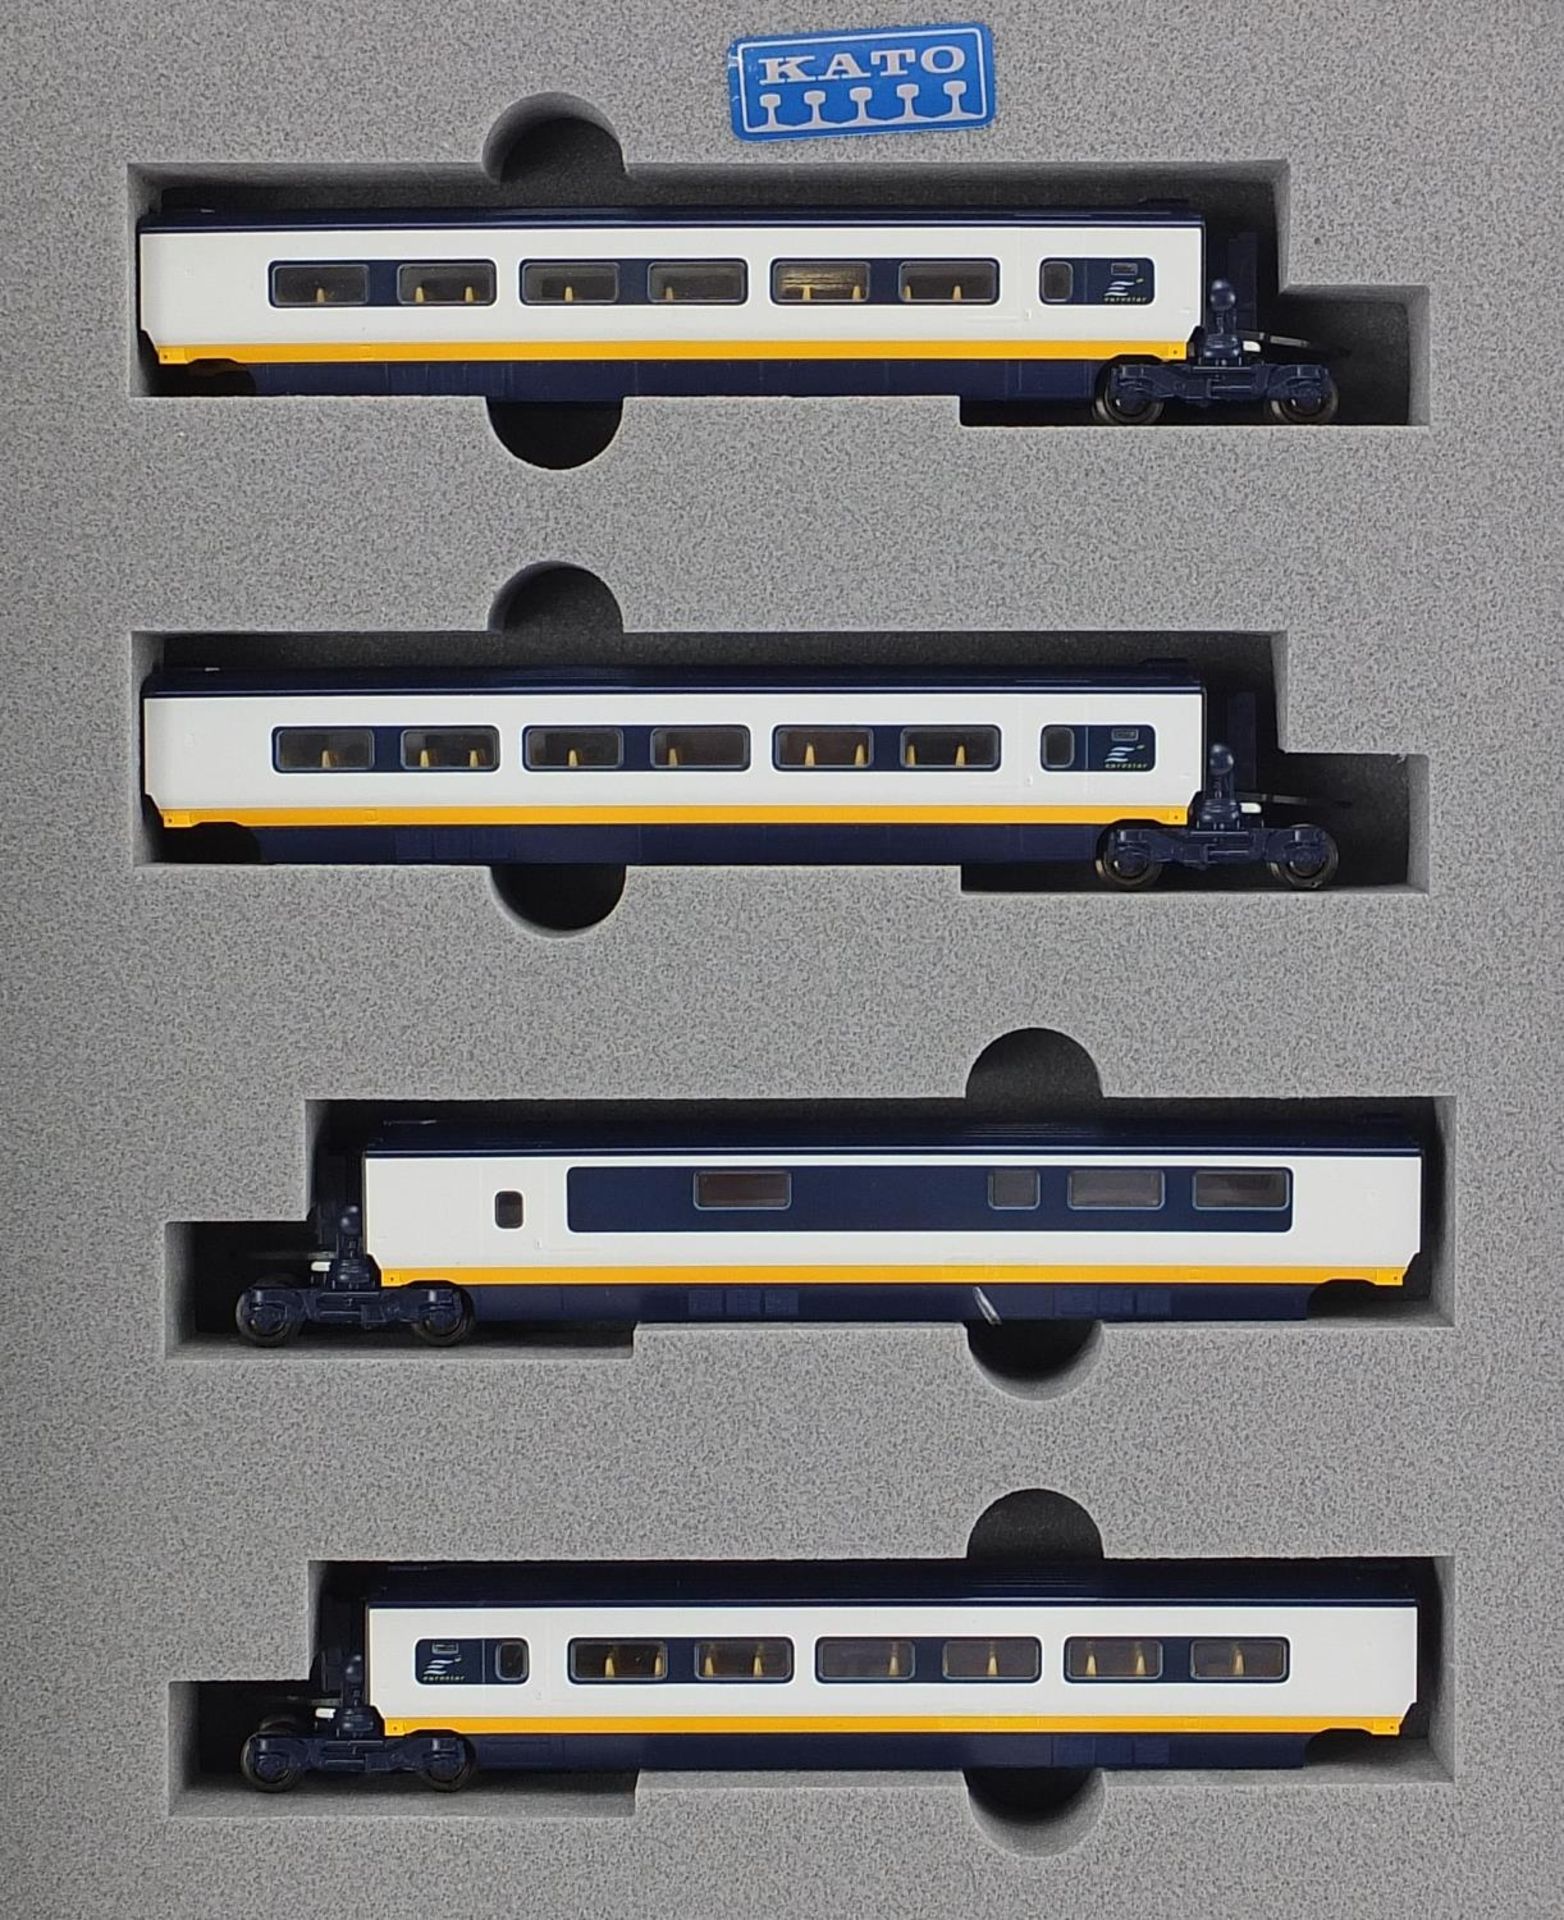 Two Kato N gauge model railway Eurostar four car sets with boxes, numbers 10-328 - Image 3 of 6